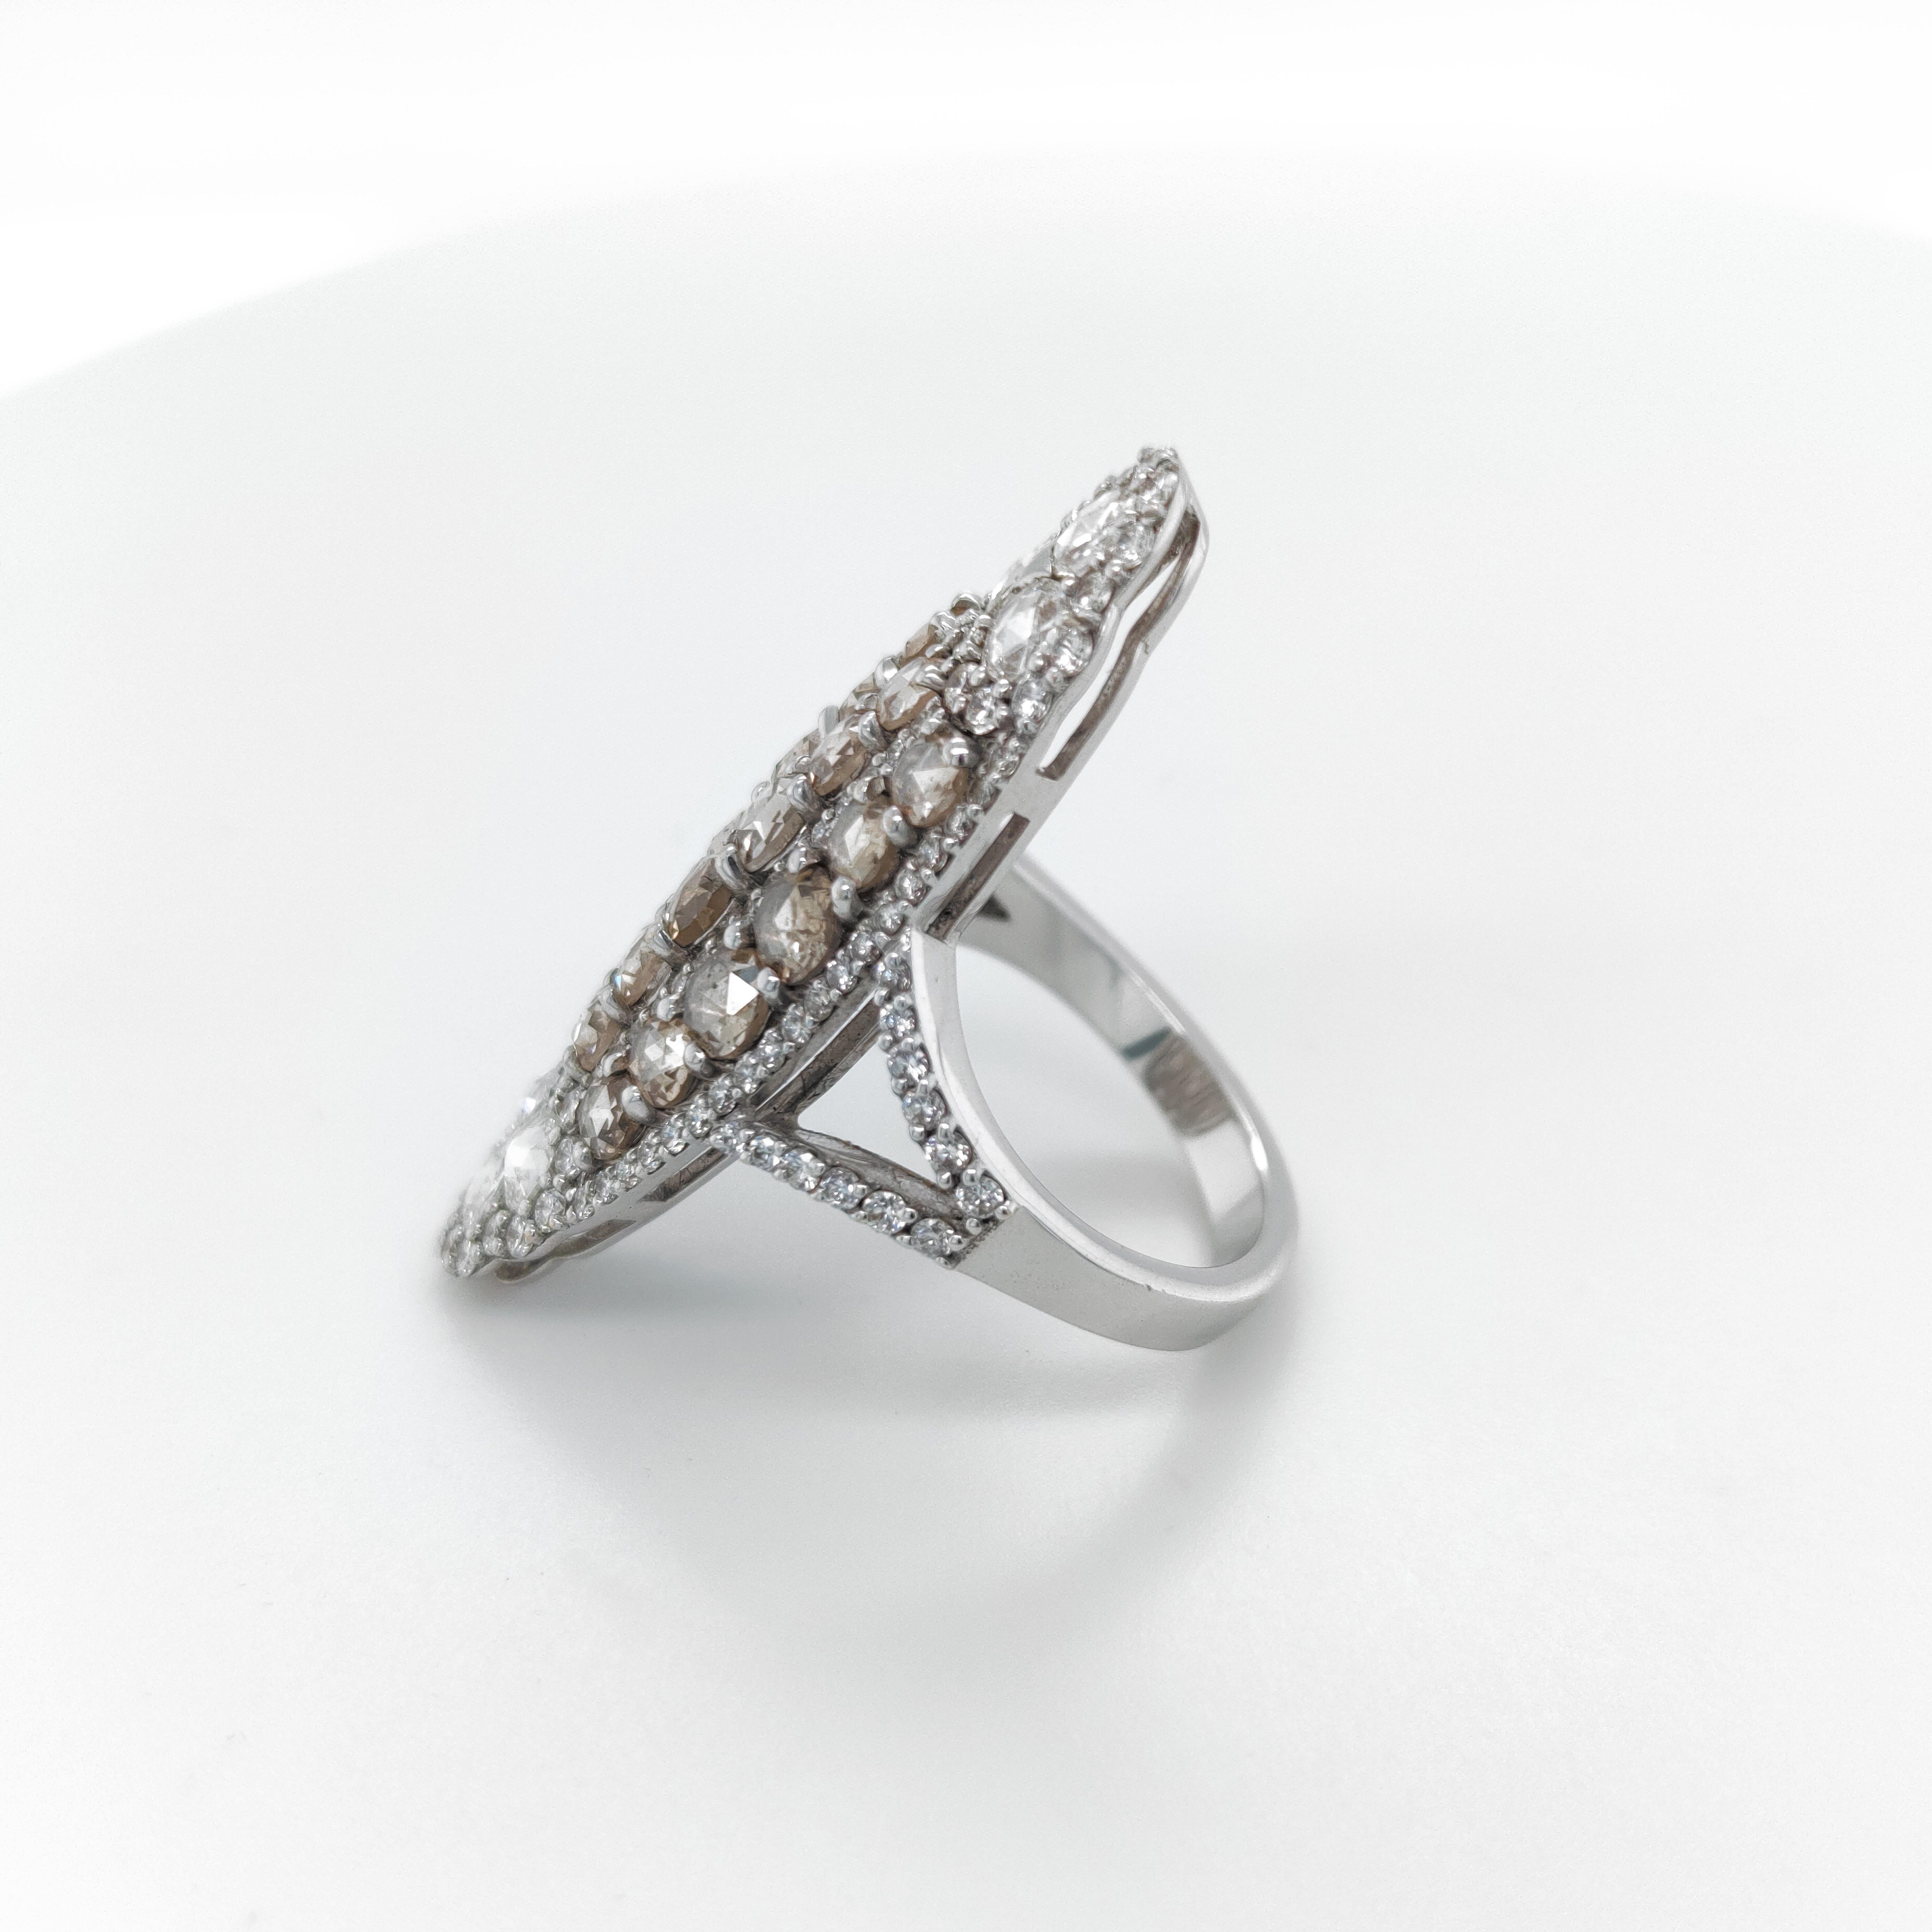 This magnificent CLIO cocktail ring is extremely versatile. You can wear it in a casual mode with jeans and a tshirt or it may be a head-turner ring at cocktails or galas. The rose-cut & brilliant diamonds are manually set following the expertise of